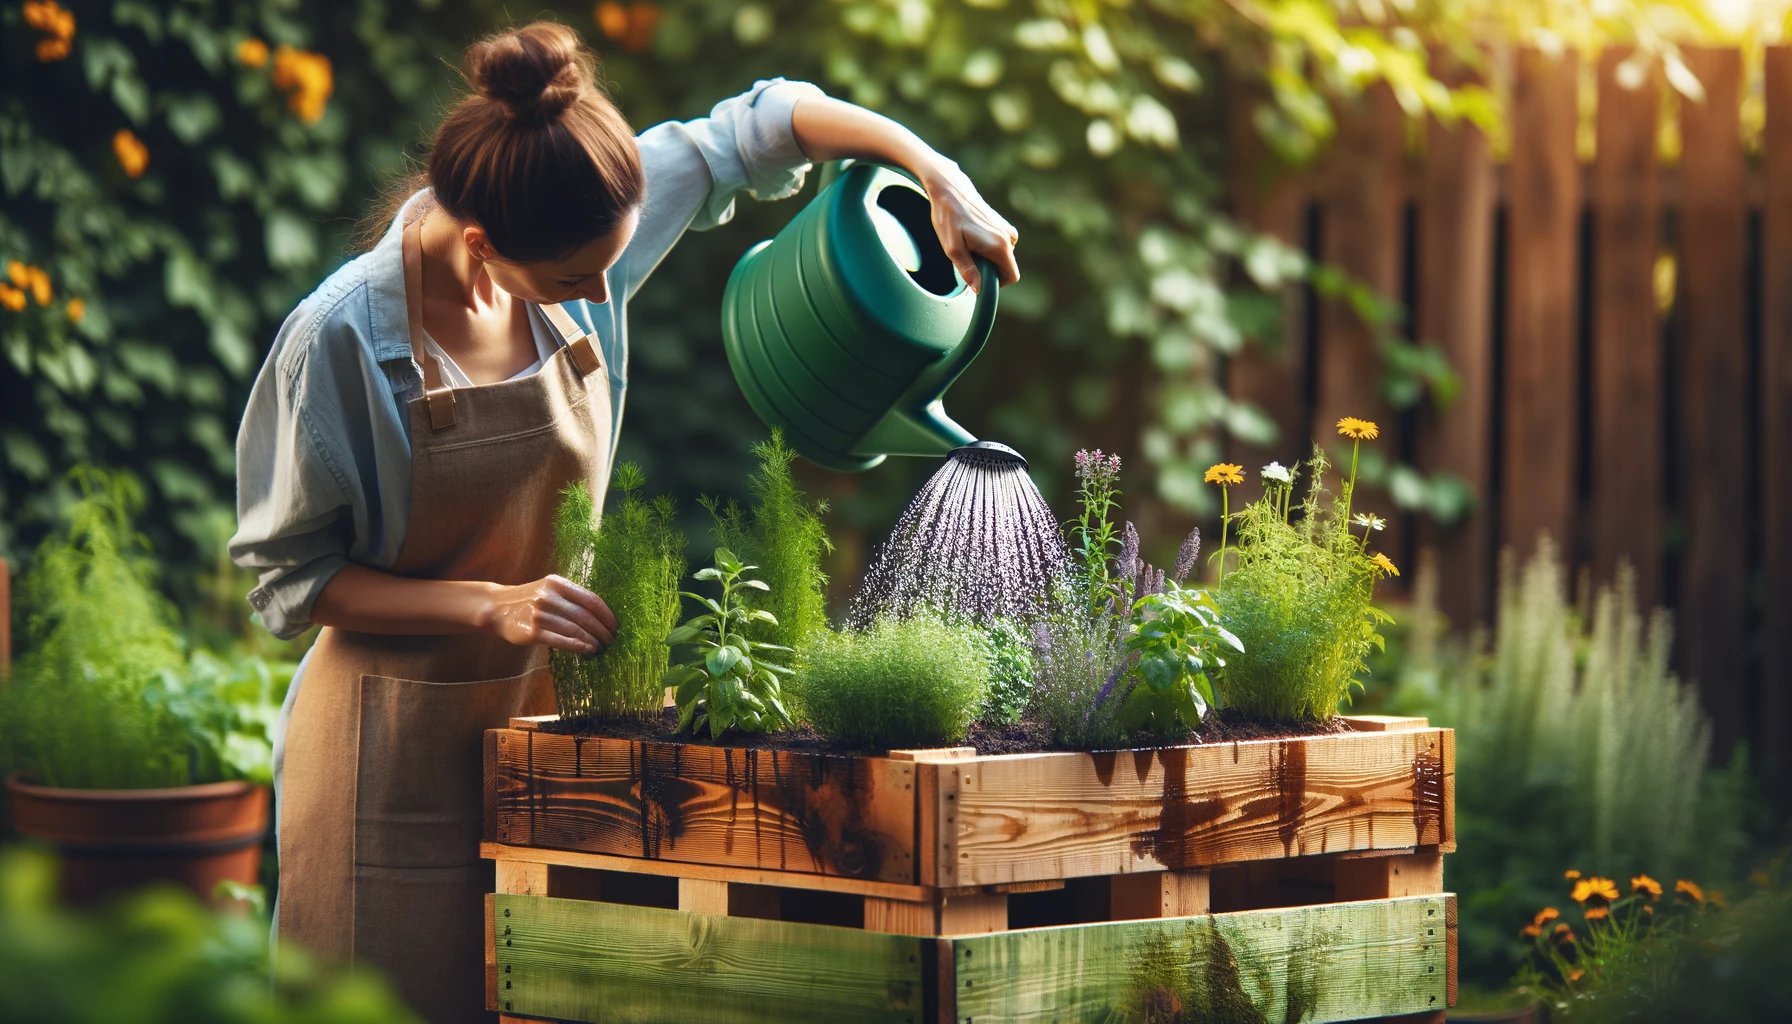 Give your new planter a good watering. The first watering should be thorough to help the plants settle in and spread their roots. Water according to the needs of the plants you have chosen.